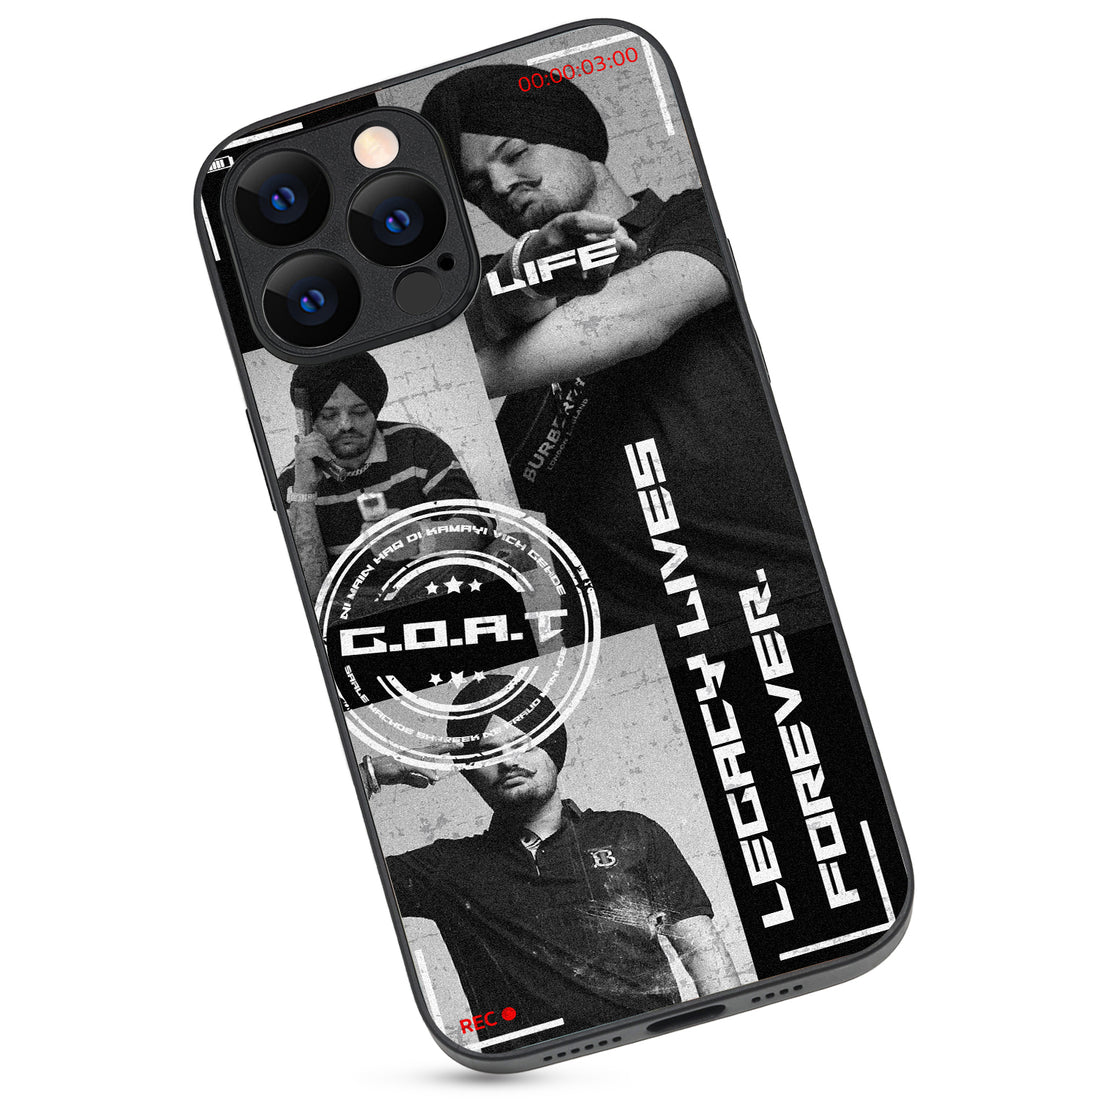 Legacy Lives Forever Sidhu Moosewala iPhone 13 Pro Max Case